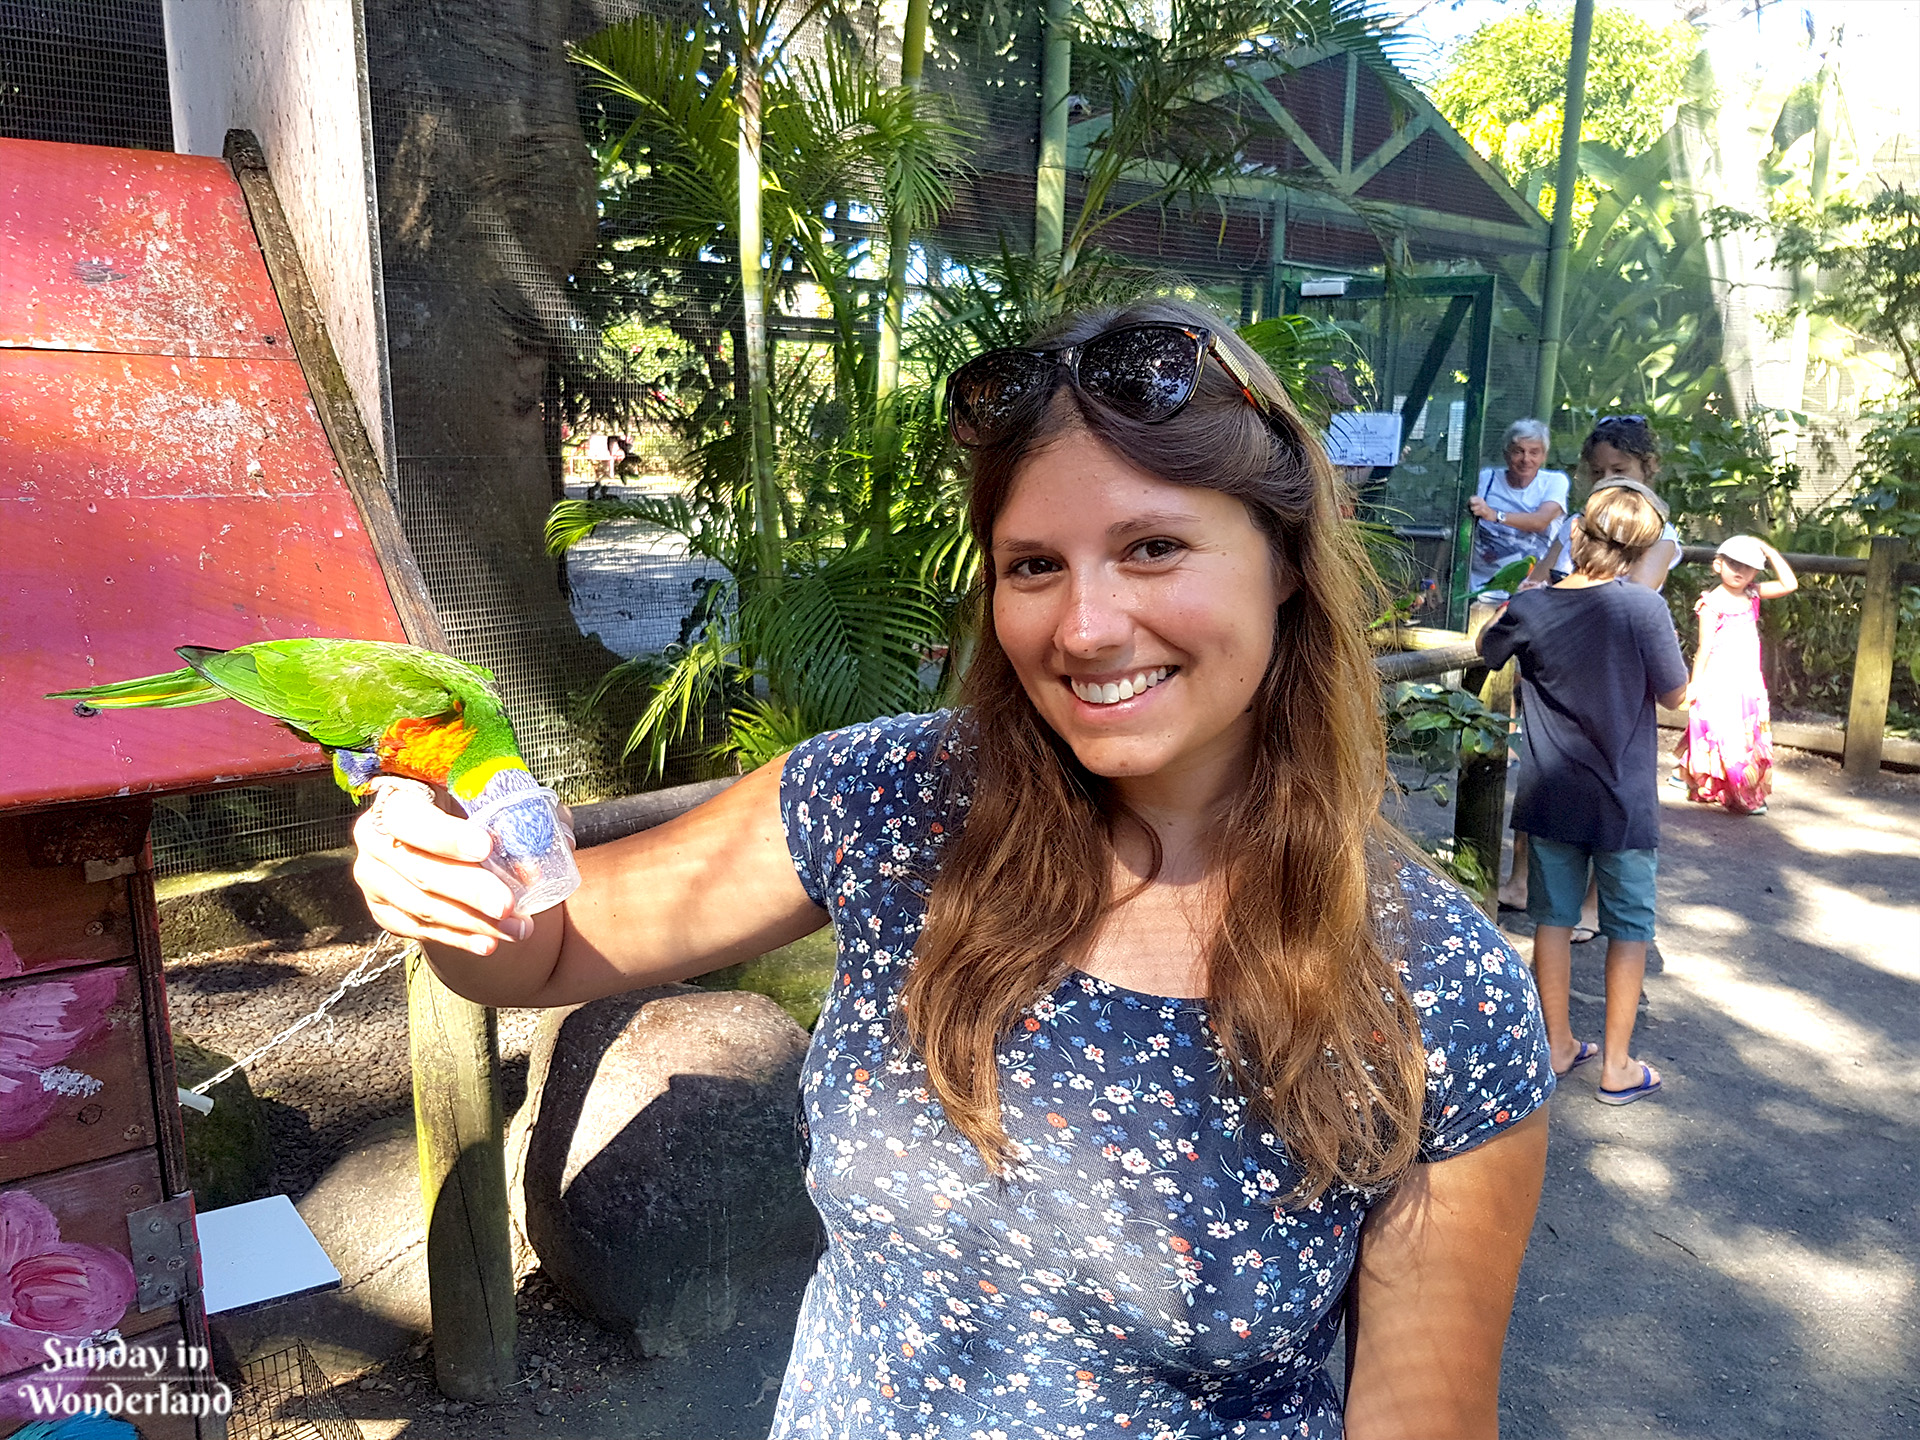 A girl holding and feeding lorikeet parrot in Botanical Garden in Deshaies in Guadeloupe - Sunday in Wonderland Blog